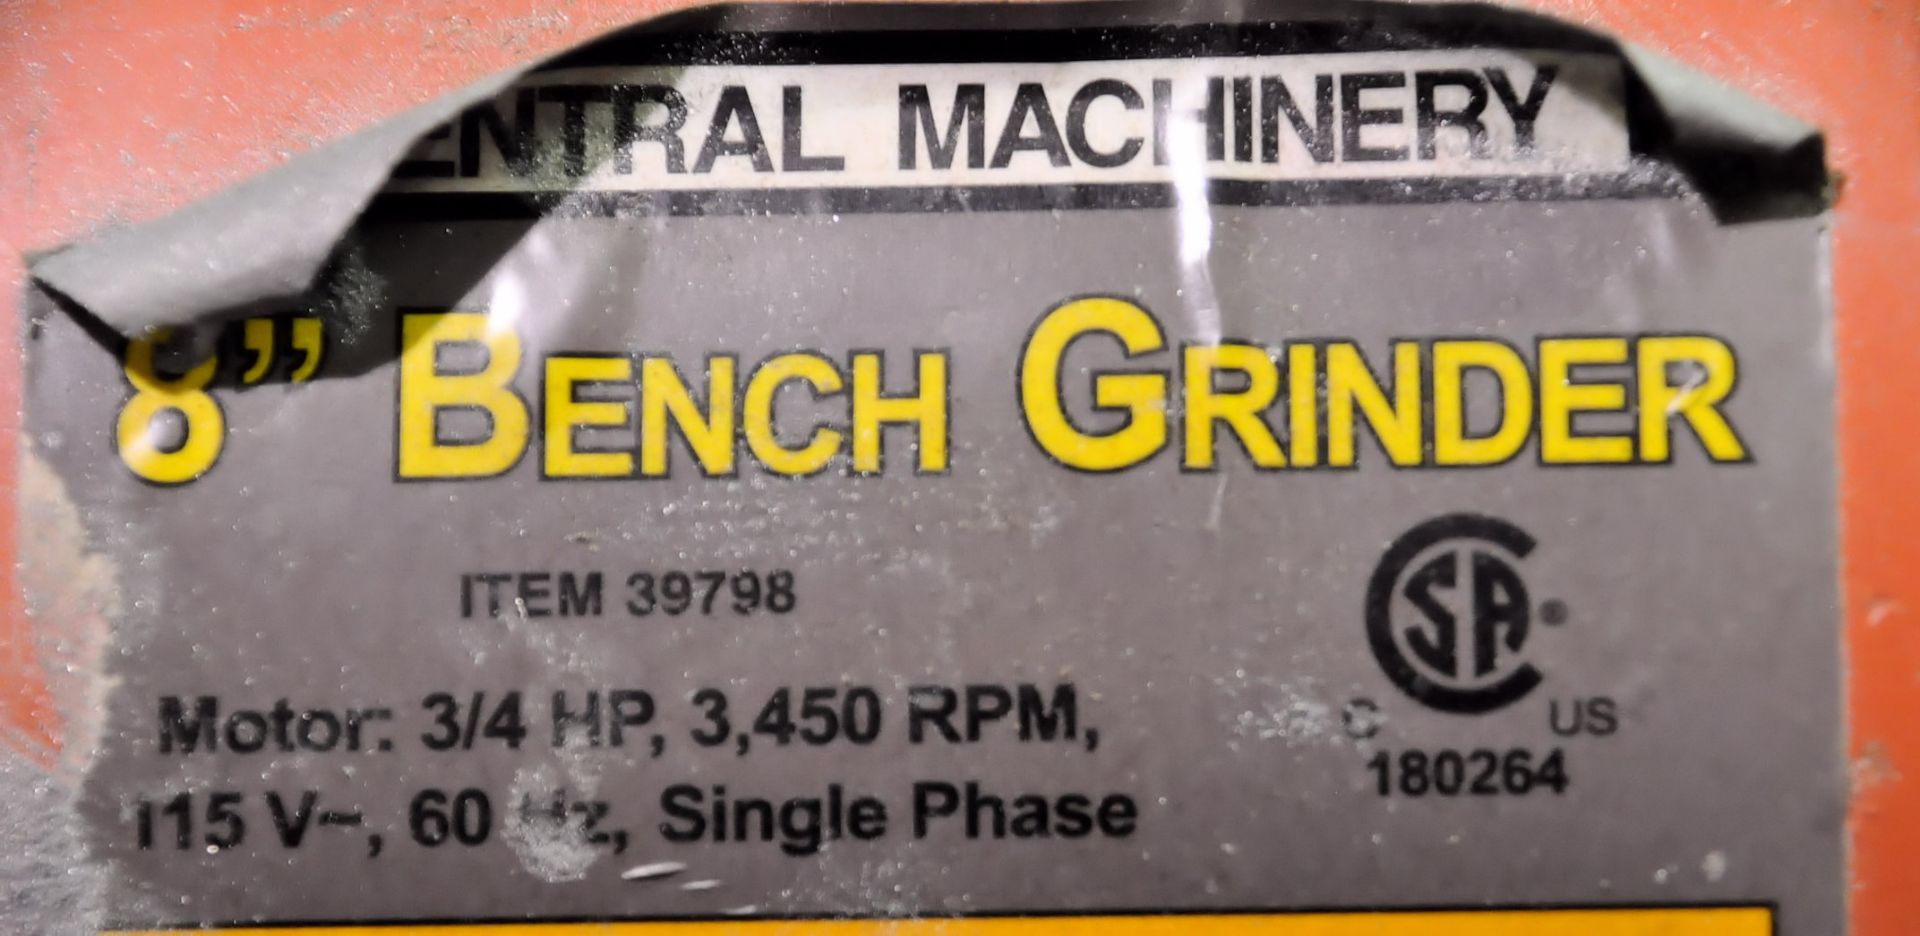 Central Machinery 8" Double End Bench Top Grinder, with Stand, 1-PH - Image 3 of 3